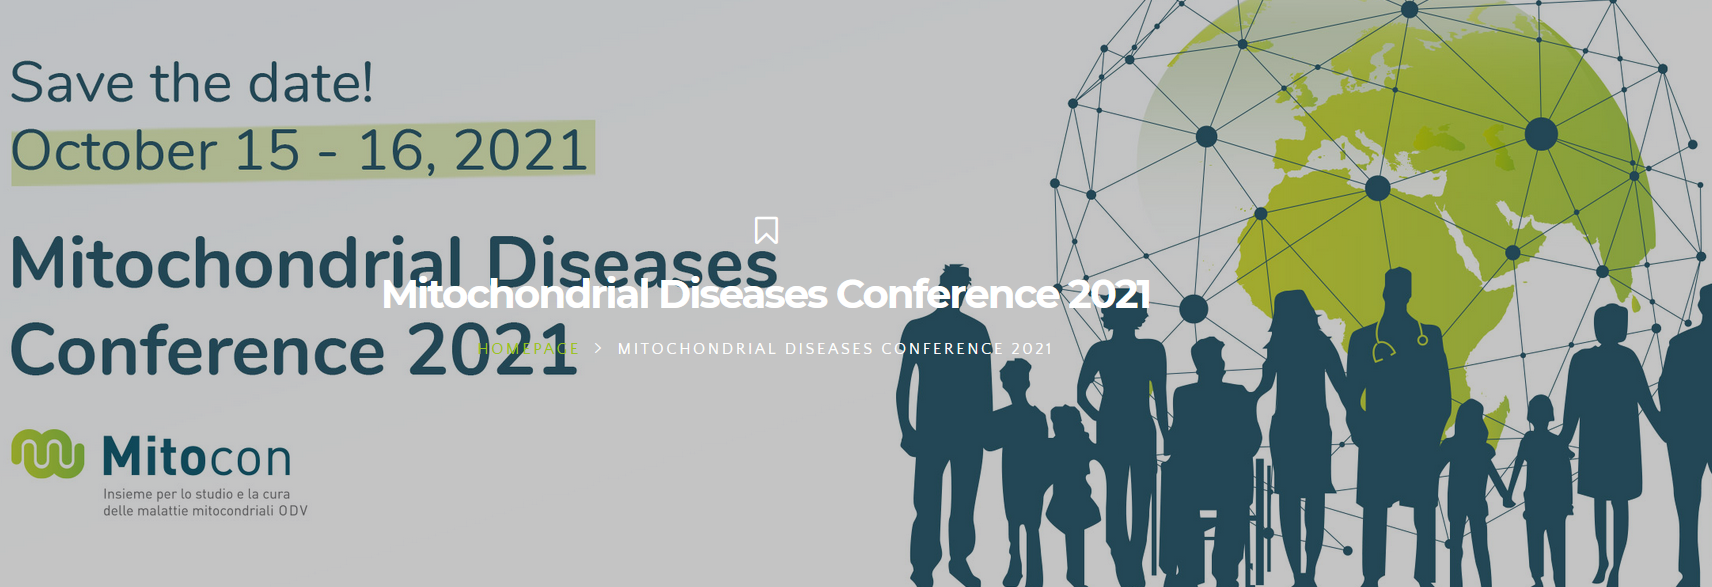 1516 October 2021 Italian Mitochondrial Disease Conference 2021